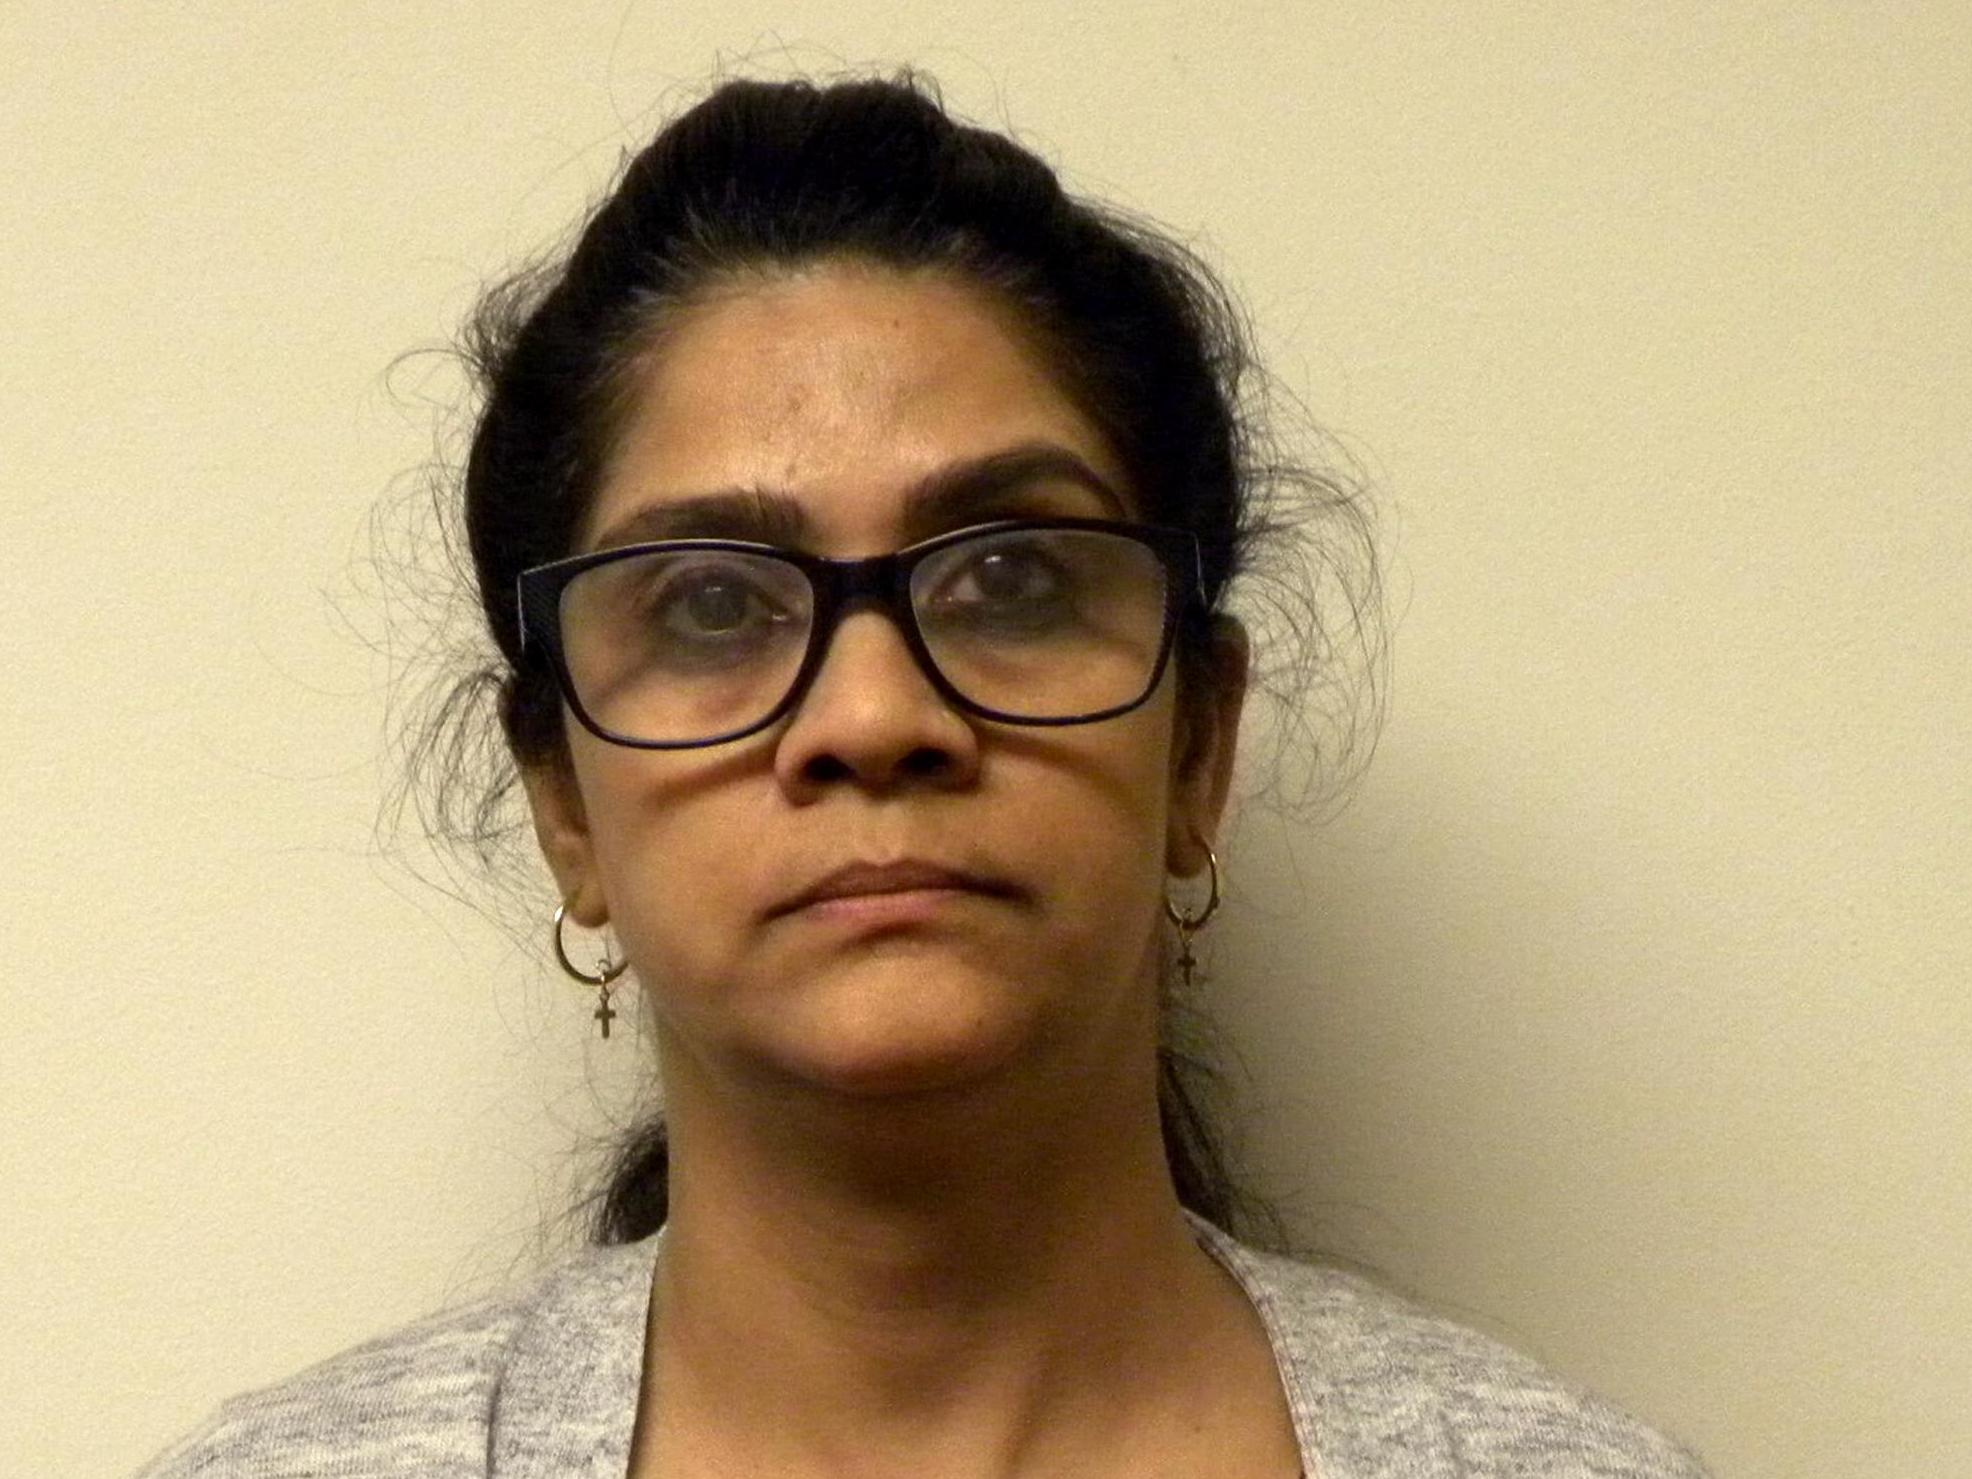 Manisha Bharade created and sold a spray sanitiser that left multiple children with burns, state and county law enforcement officials said